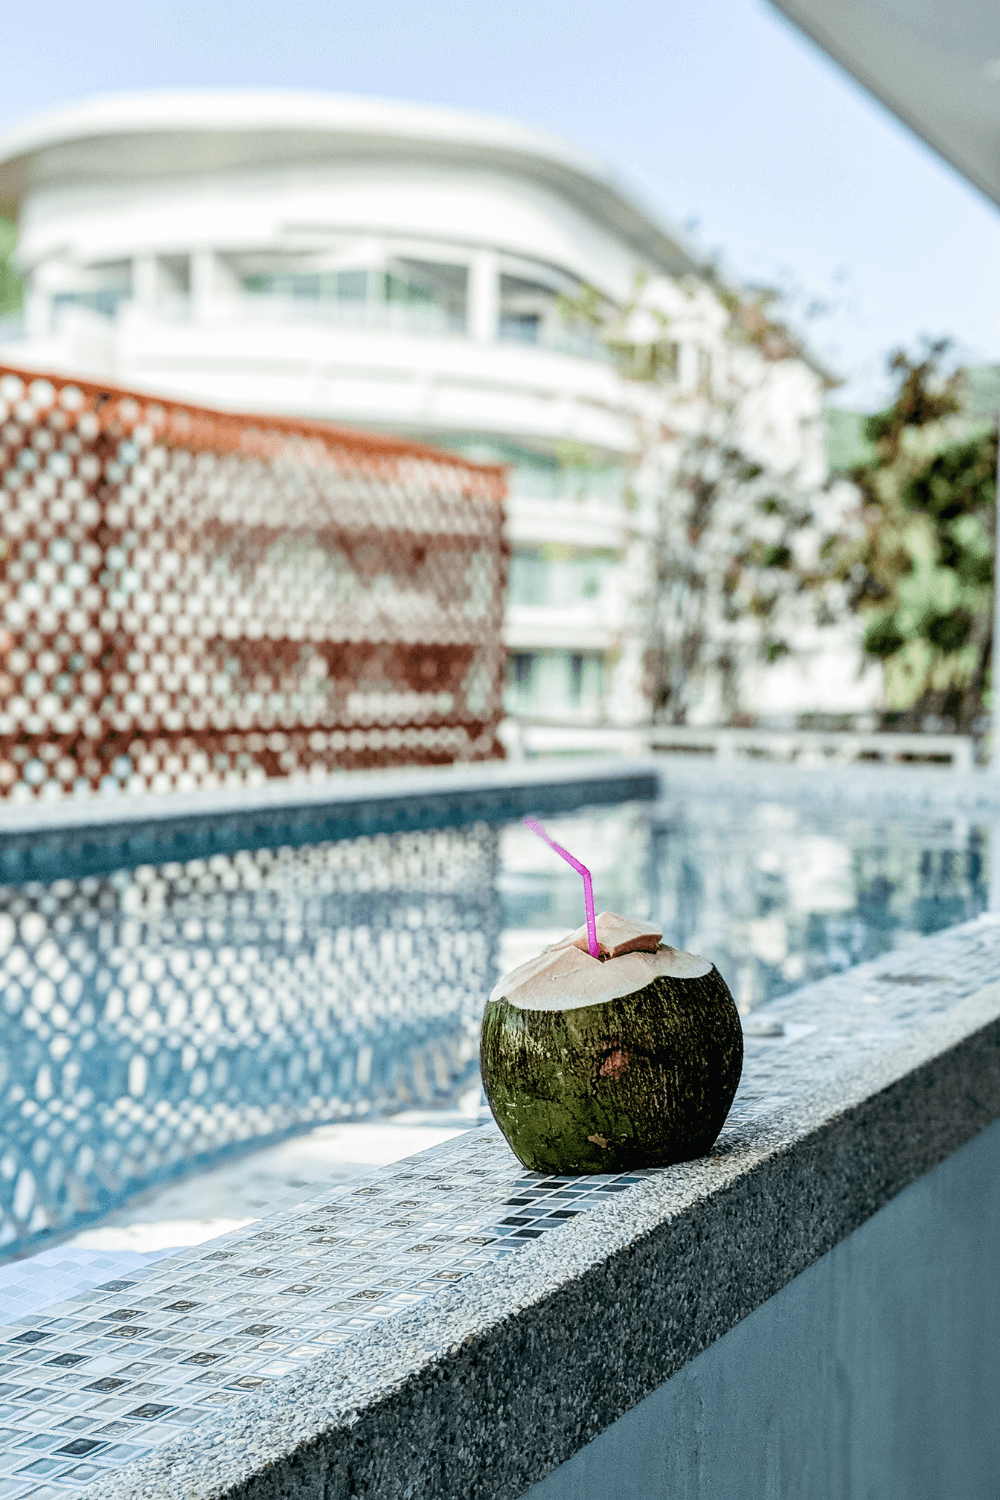 A coconut and the private pool in Phuket